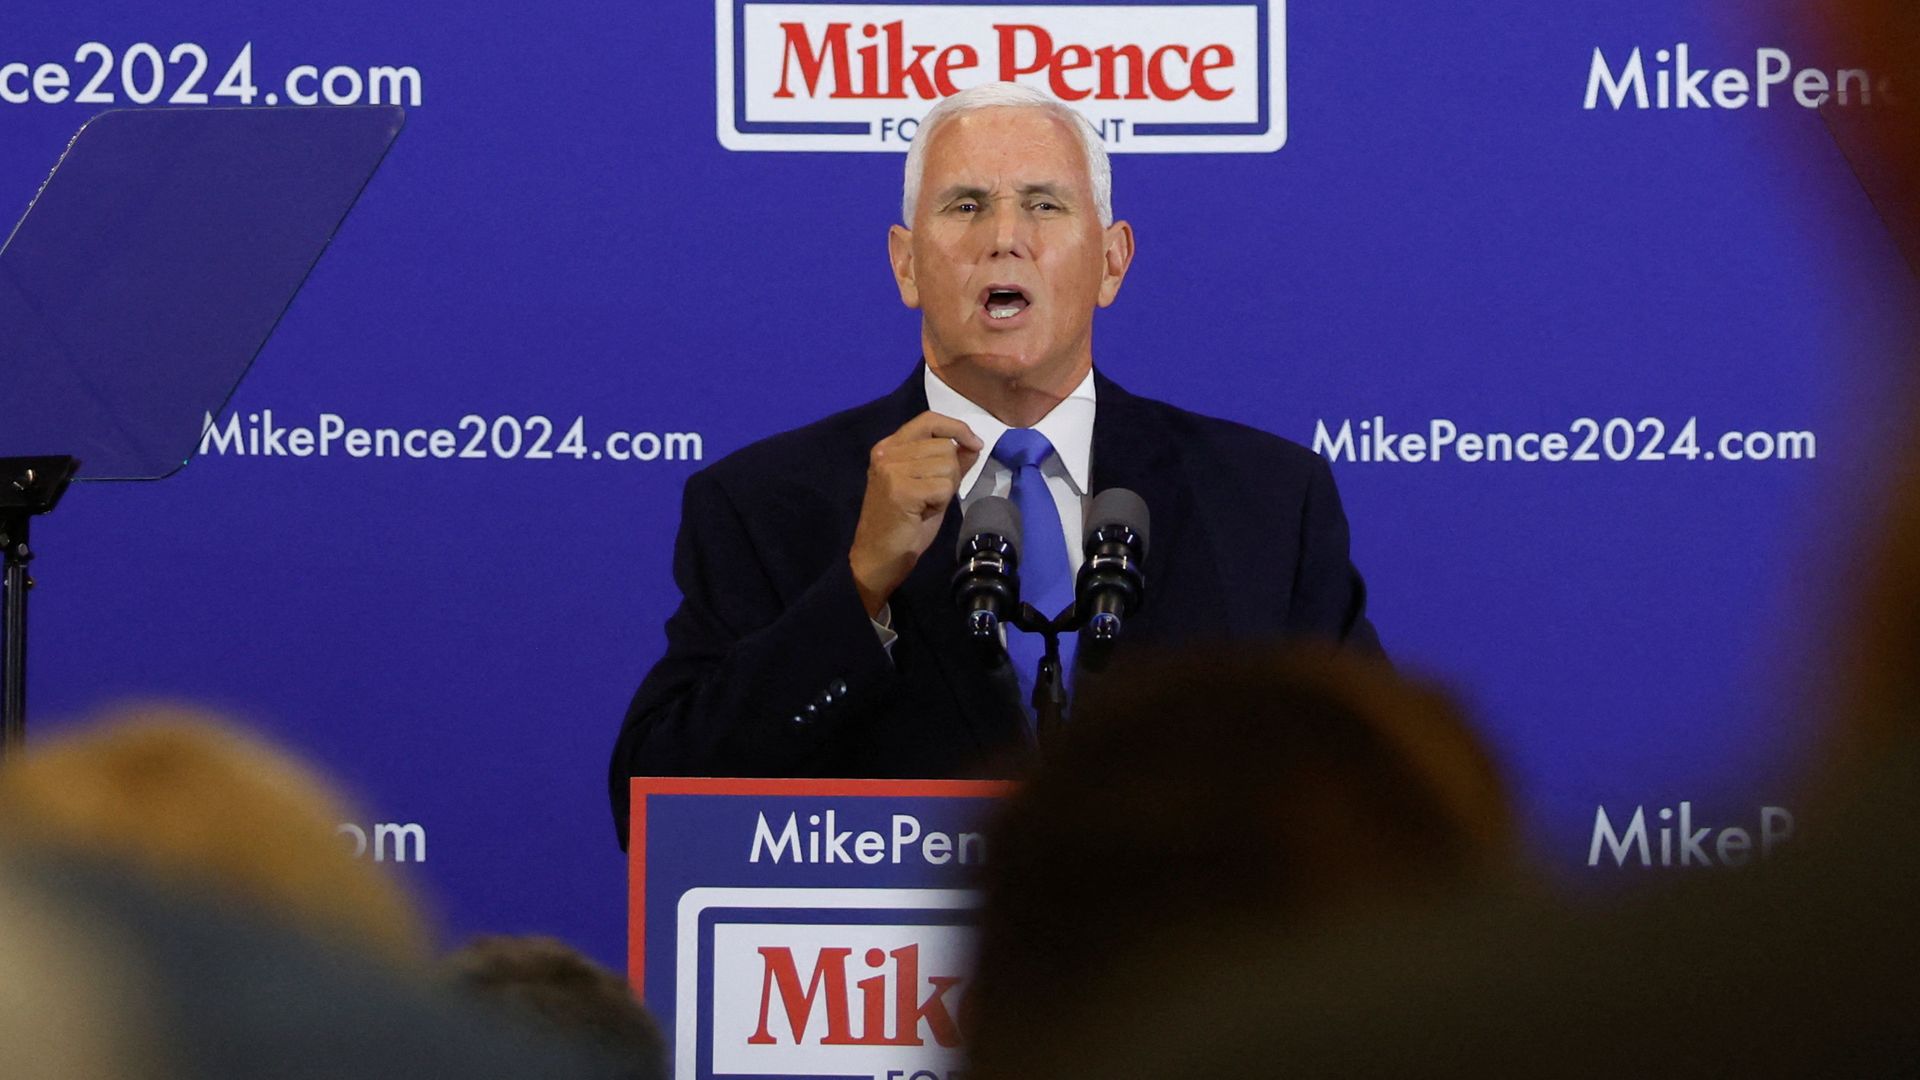 Former Vice President Mike Pence dropped out of the presidential primary as candidates work to qualify for the third debate on Nov. 8.